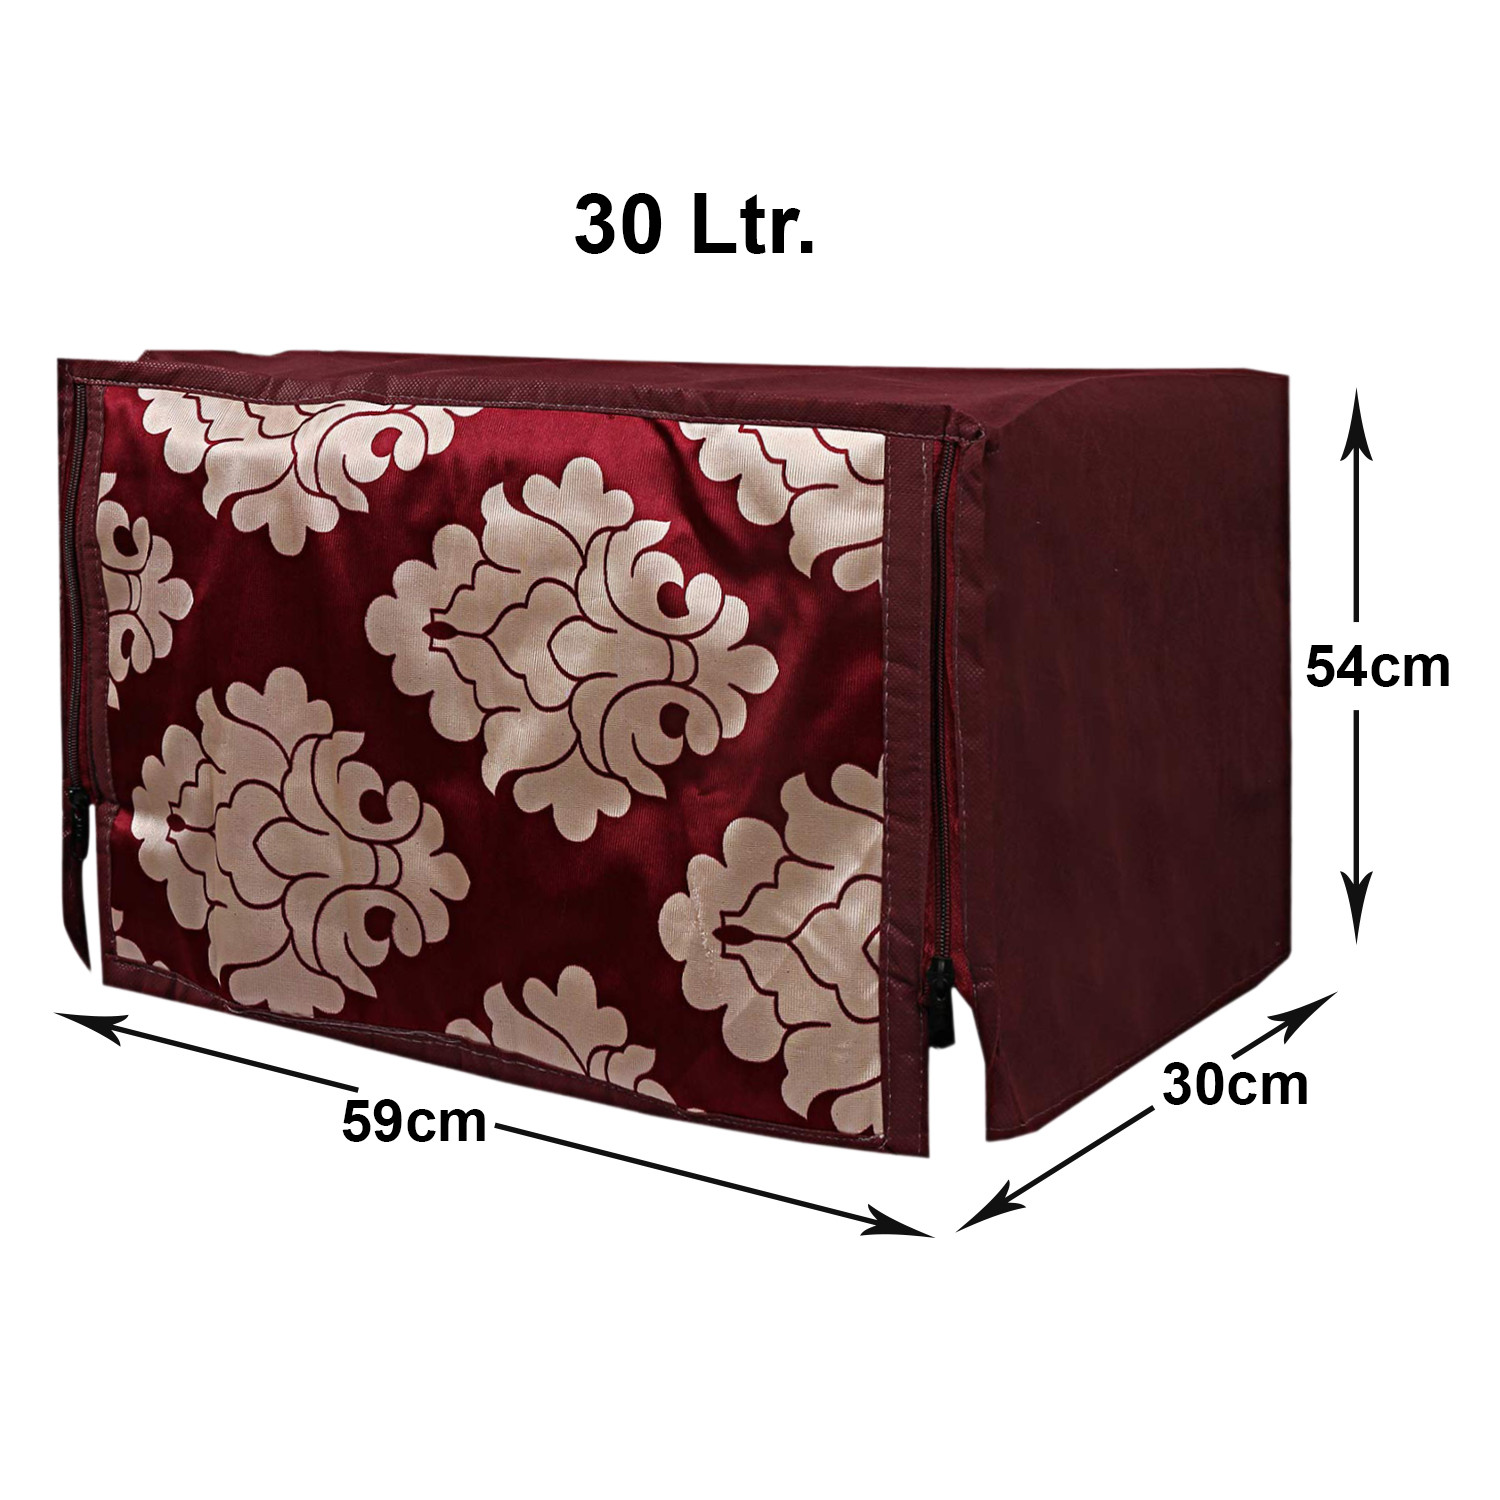 Kuber Industries Multiuses PVC Flower Print Microwave Oven Cover For Home & Kitchen 30 Ltr. (Maroon)